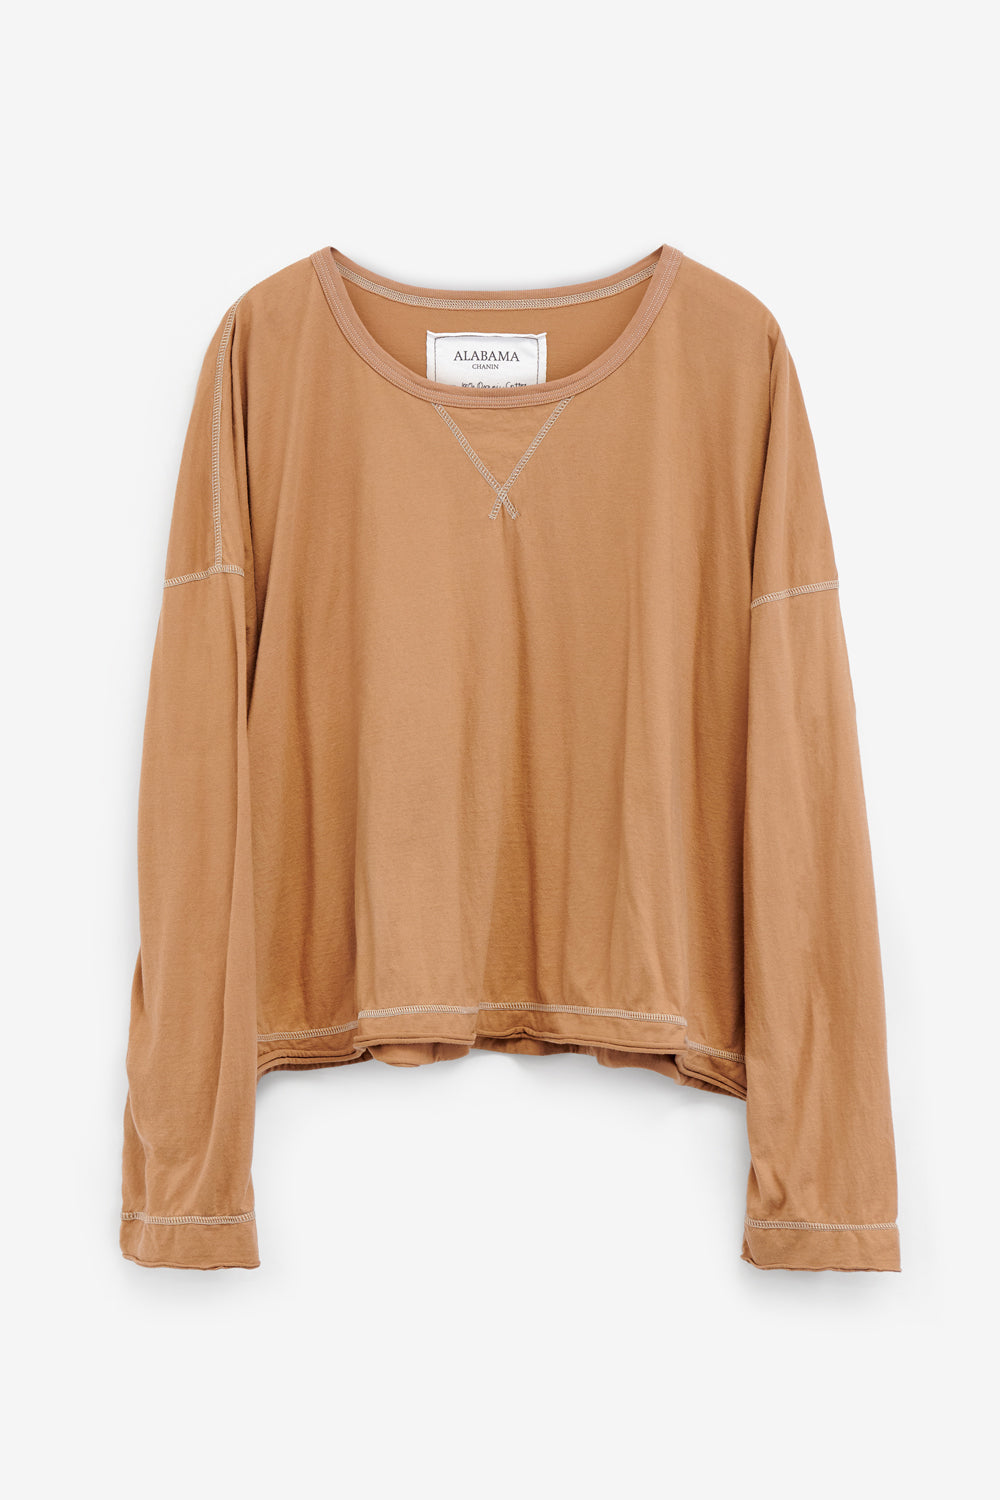 Alabama Chanin Coverup with long sleeves, shown in Camel color.